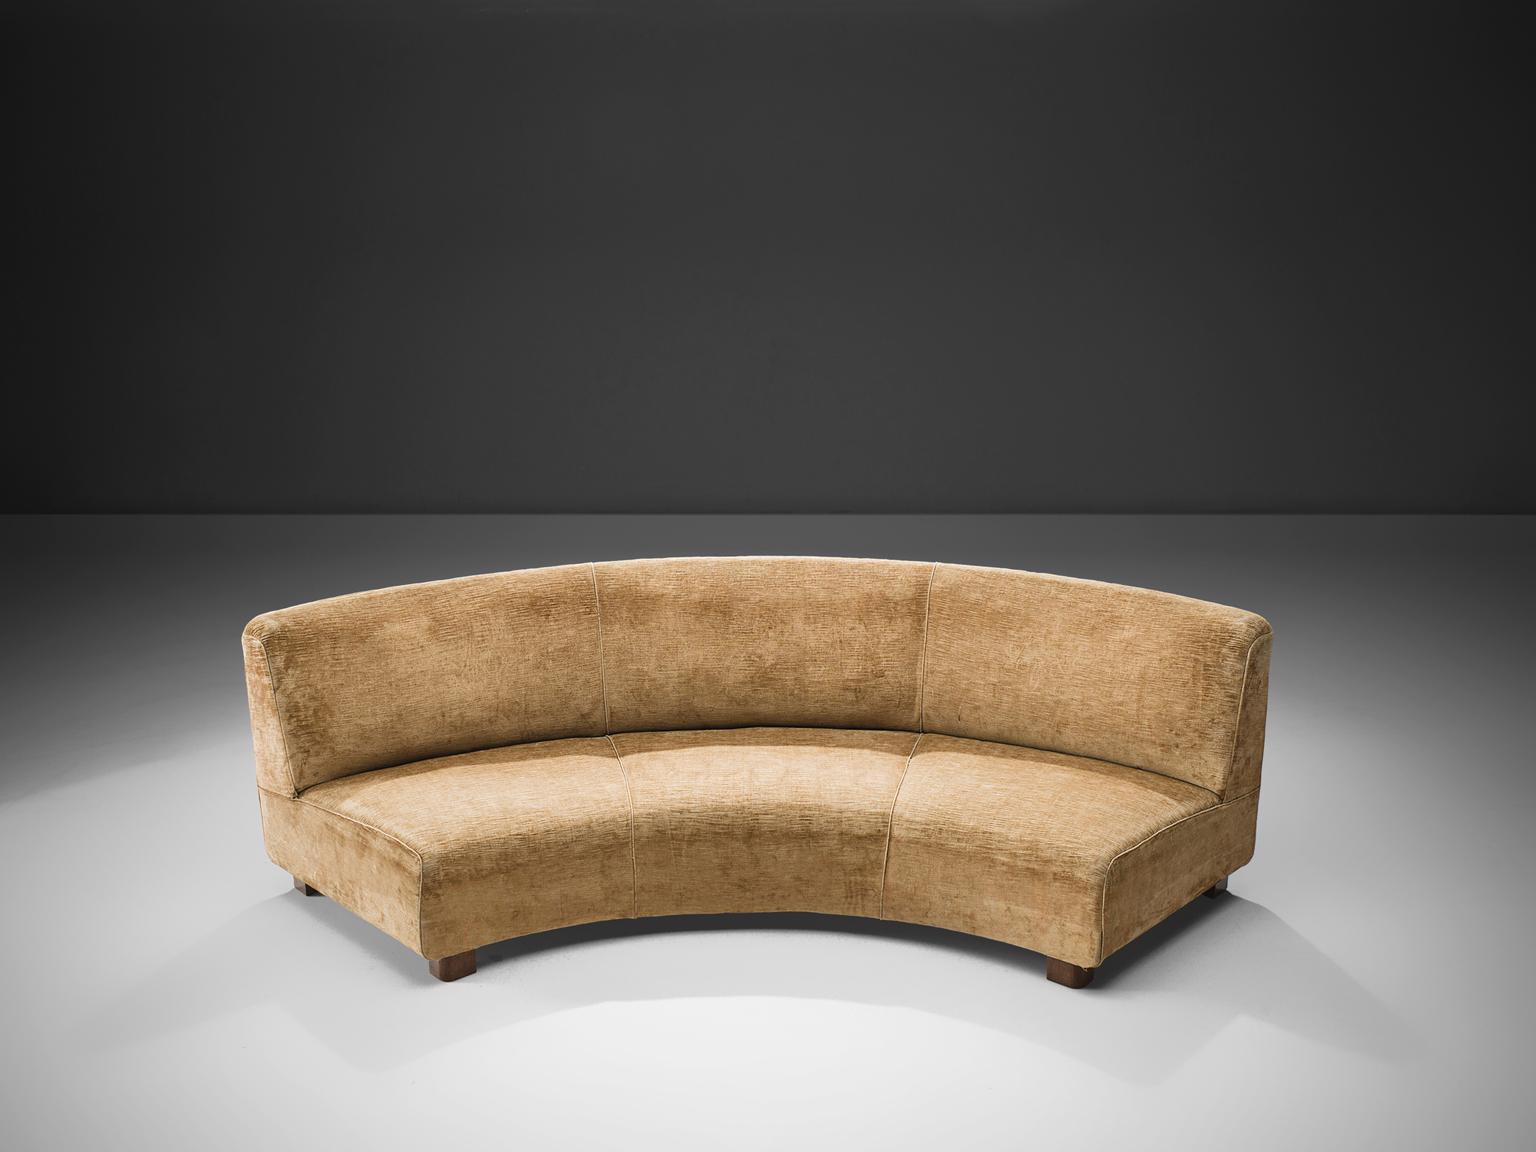 Melchiorre Bega, curved sofa in beige velvet and oak, Italy, circa 1935. 

This large curved sofa which is also used as a centre piece, of a set of other two items, and is made in ocre to beige velvet by Melchiorre Bega. The piece is designed as